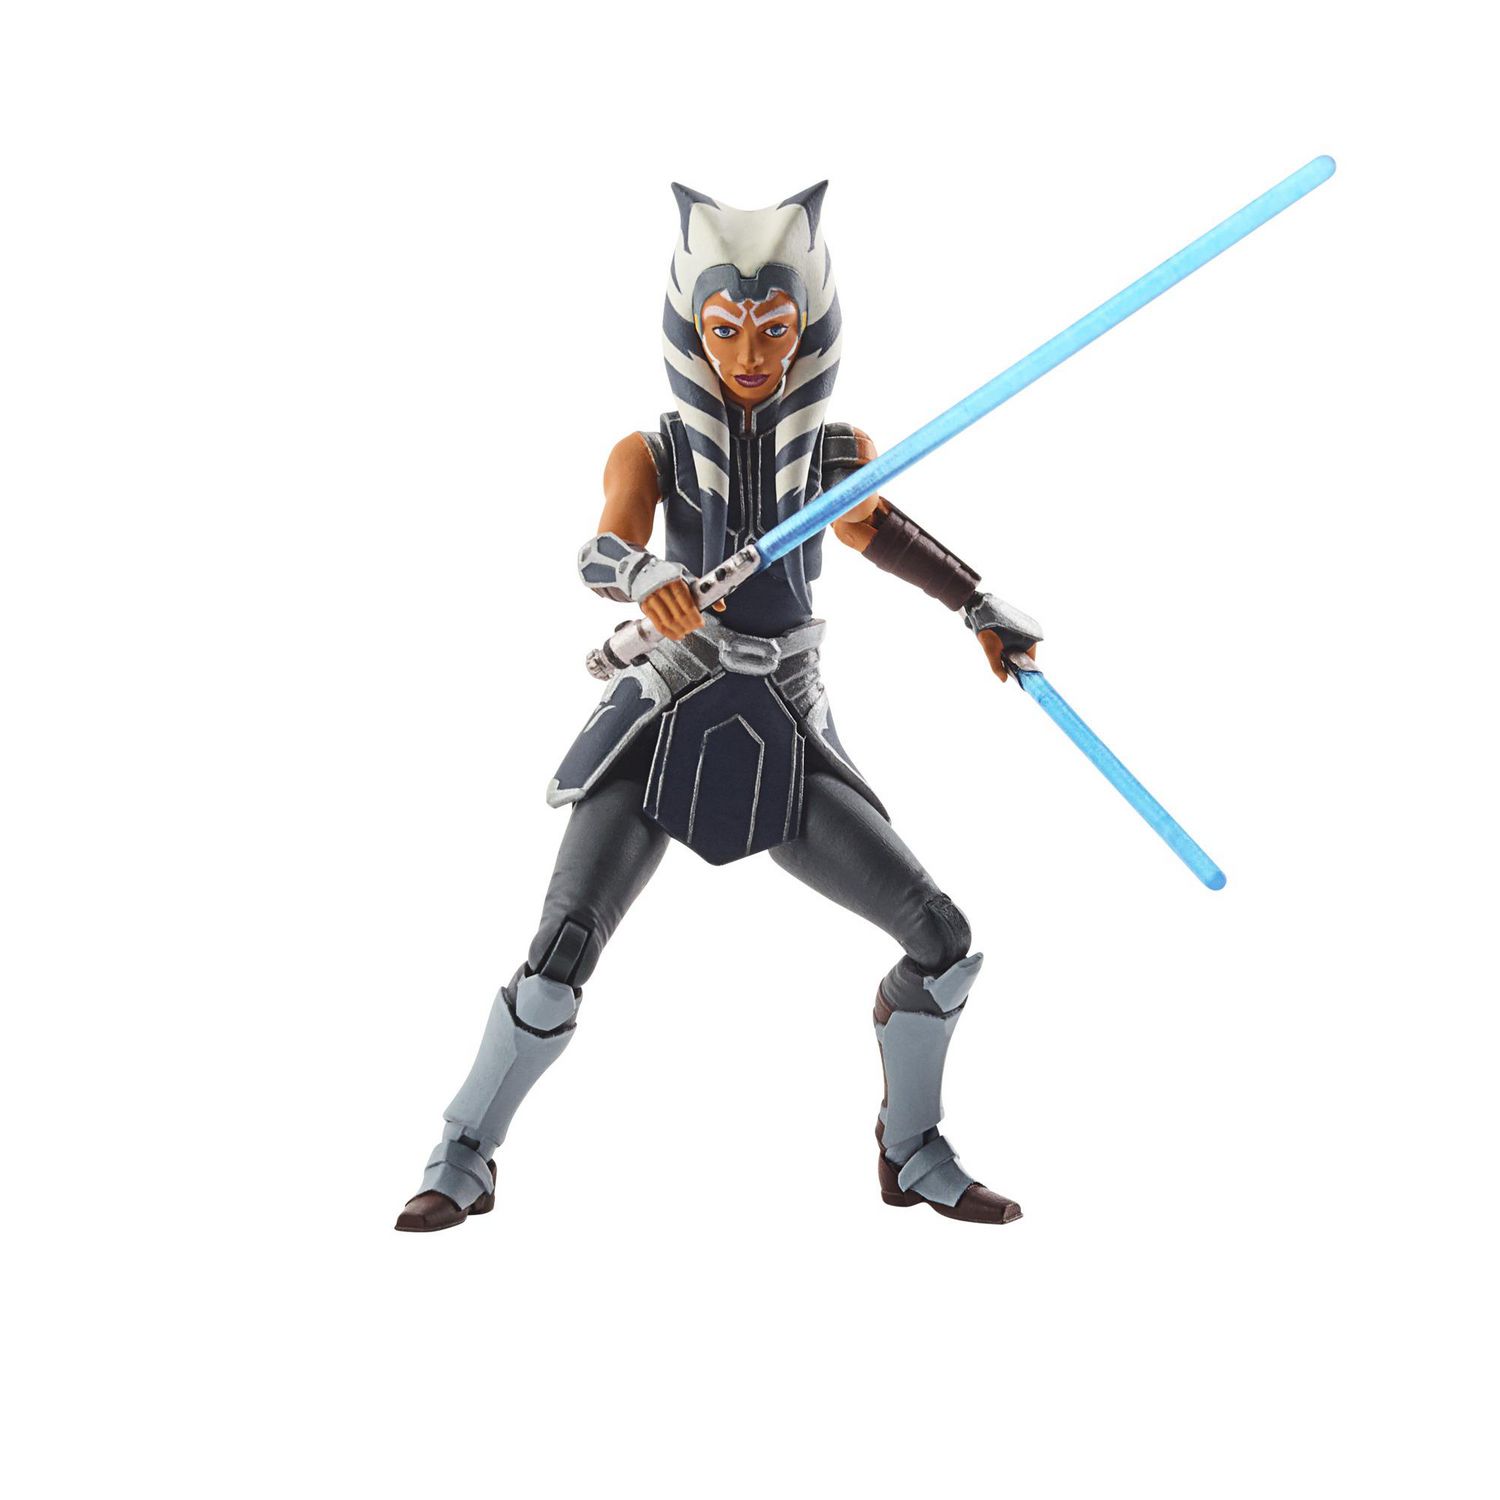 The　Star　The　Action　(Mandalore)　Tano　Wars　Vintage　Wars　Collection　Clone　Wars:　Ahsoka　Toy,　Star　3.75-Inch-Scale　Figure